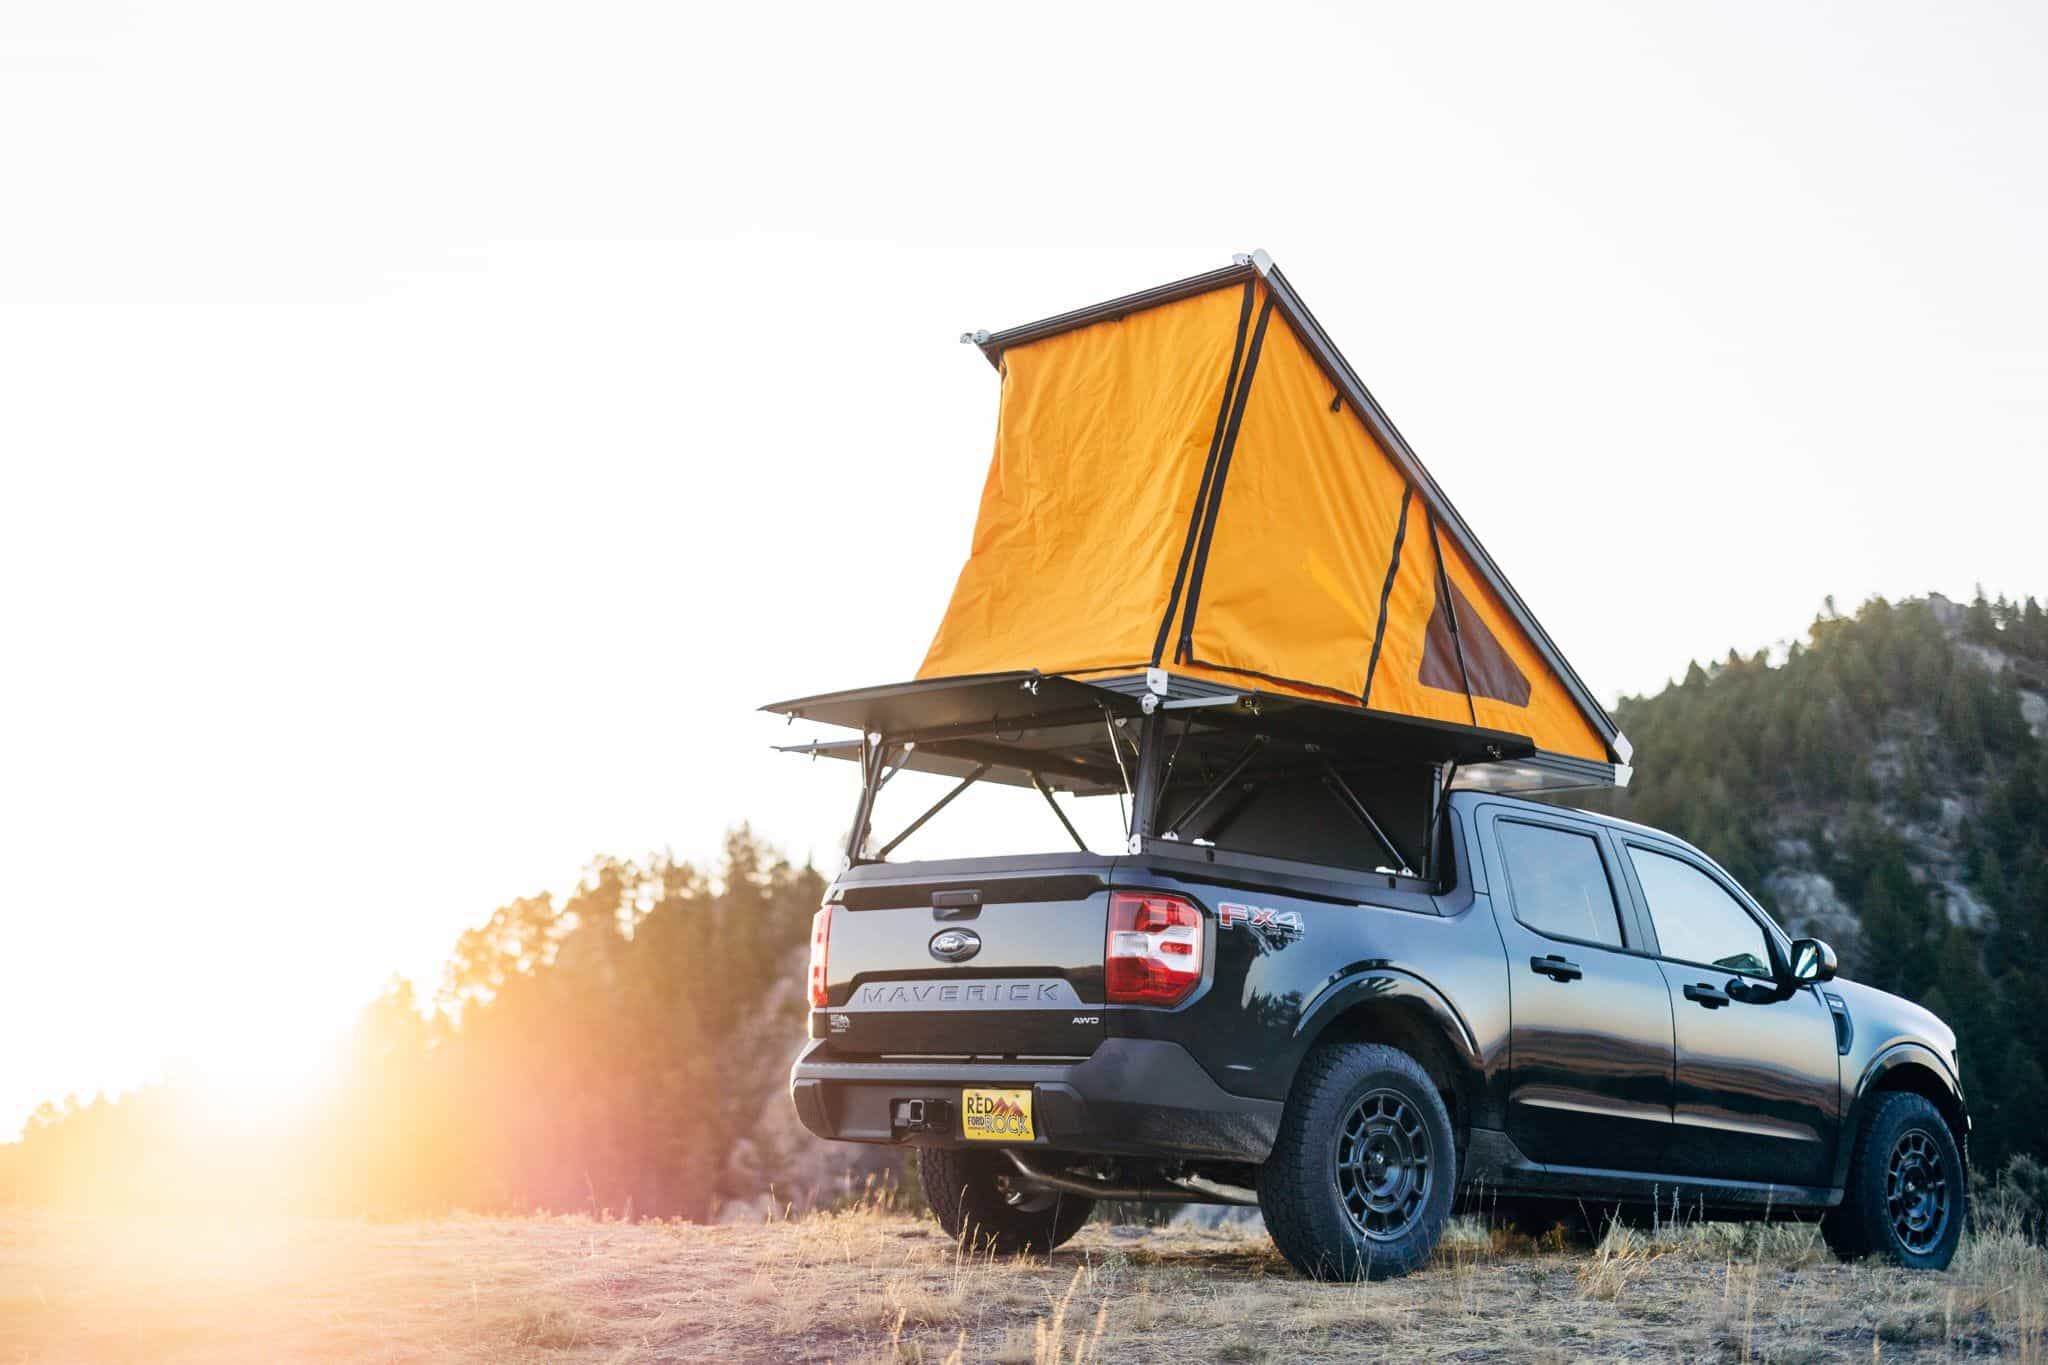 Ford Maverick Pop-Up Camper full guide- expert review here!